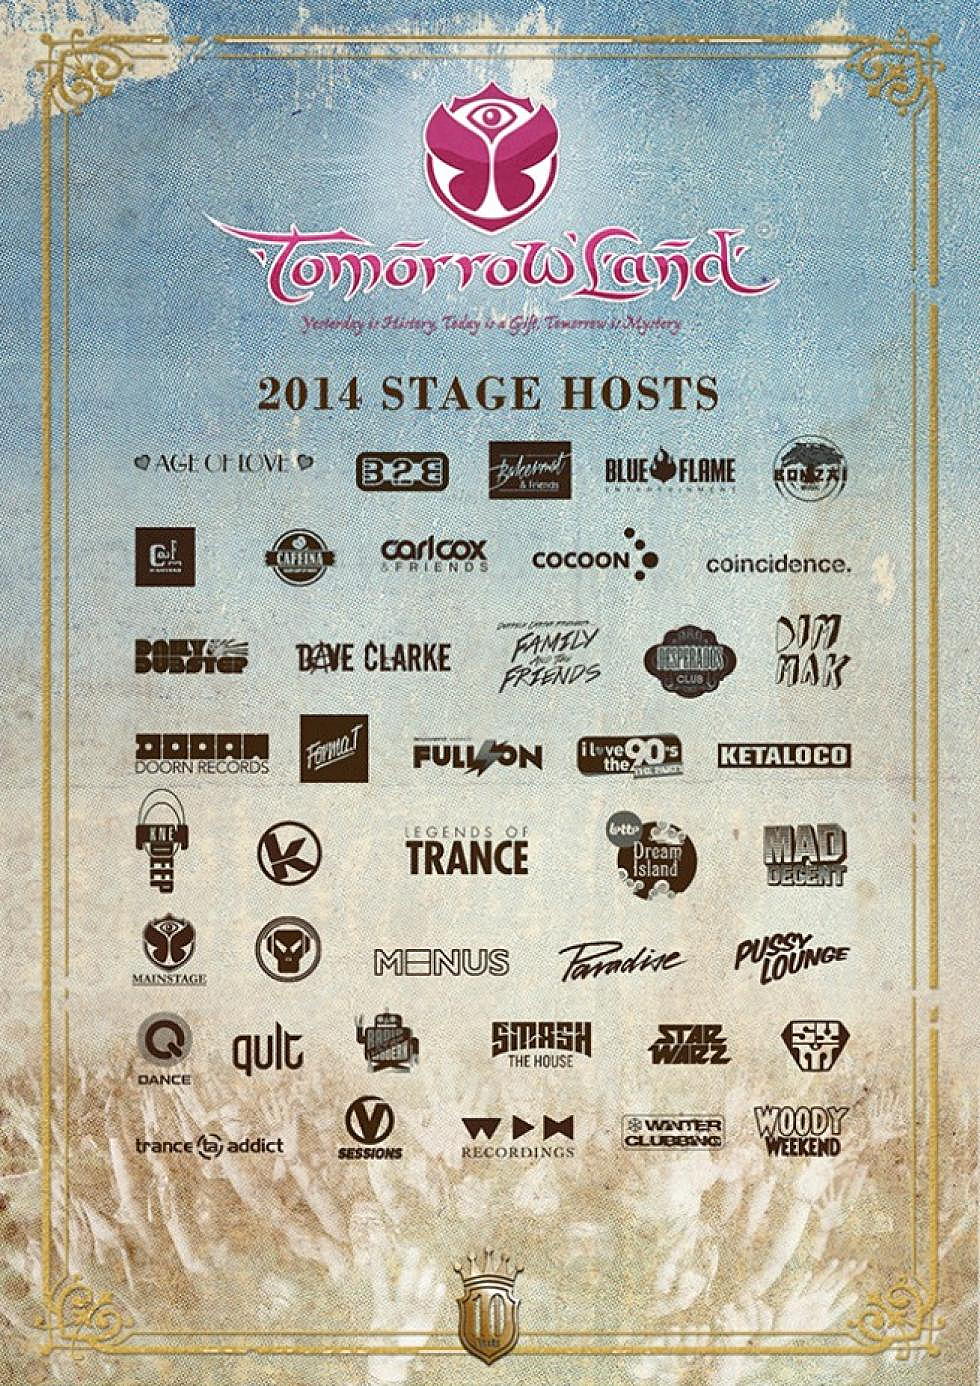 Tomorrowland releases full 2014 lineup!